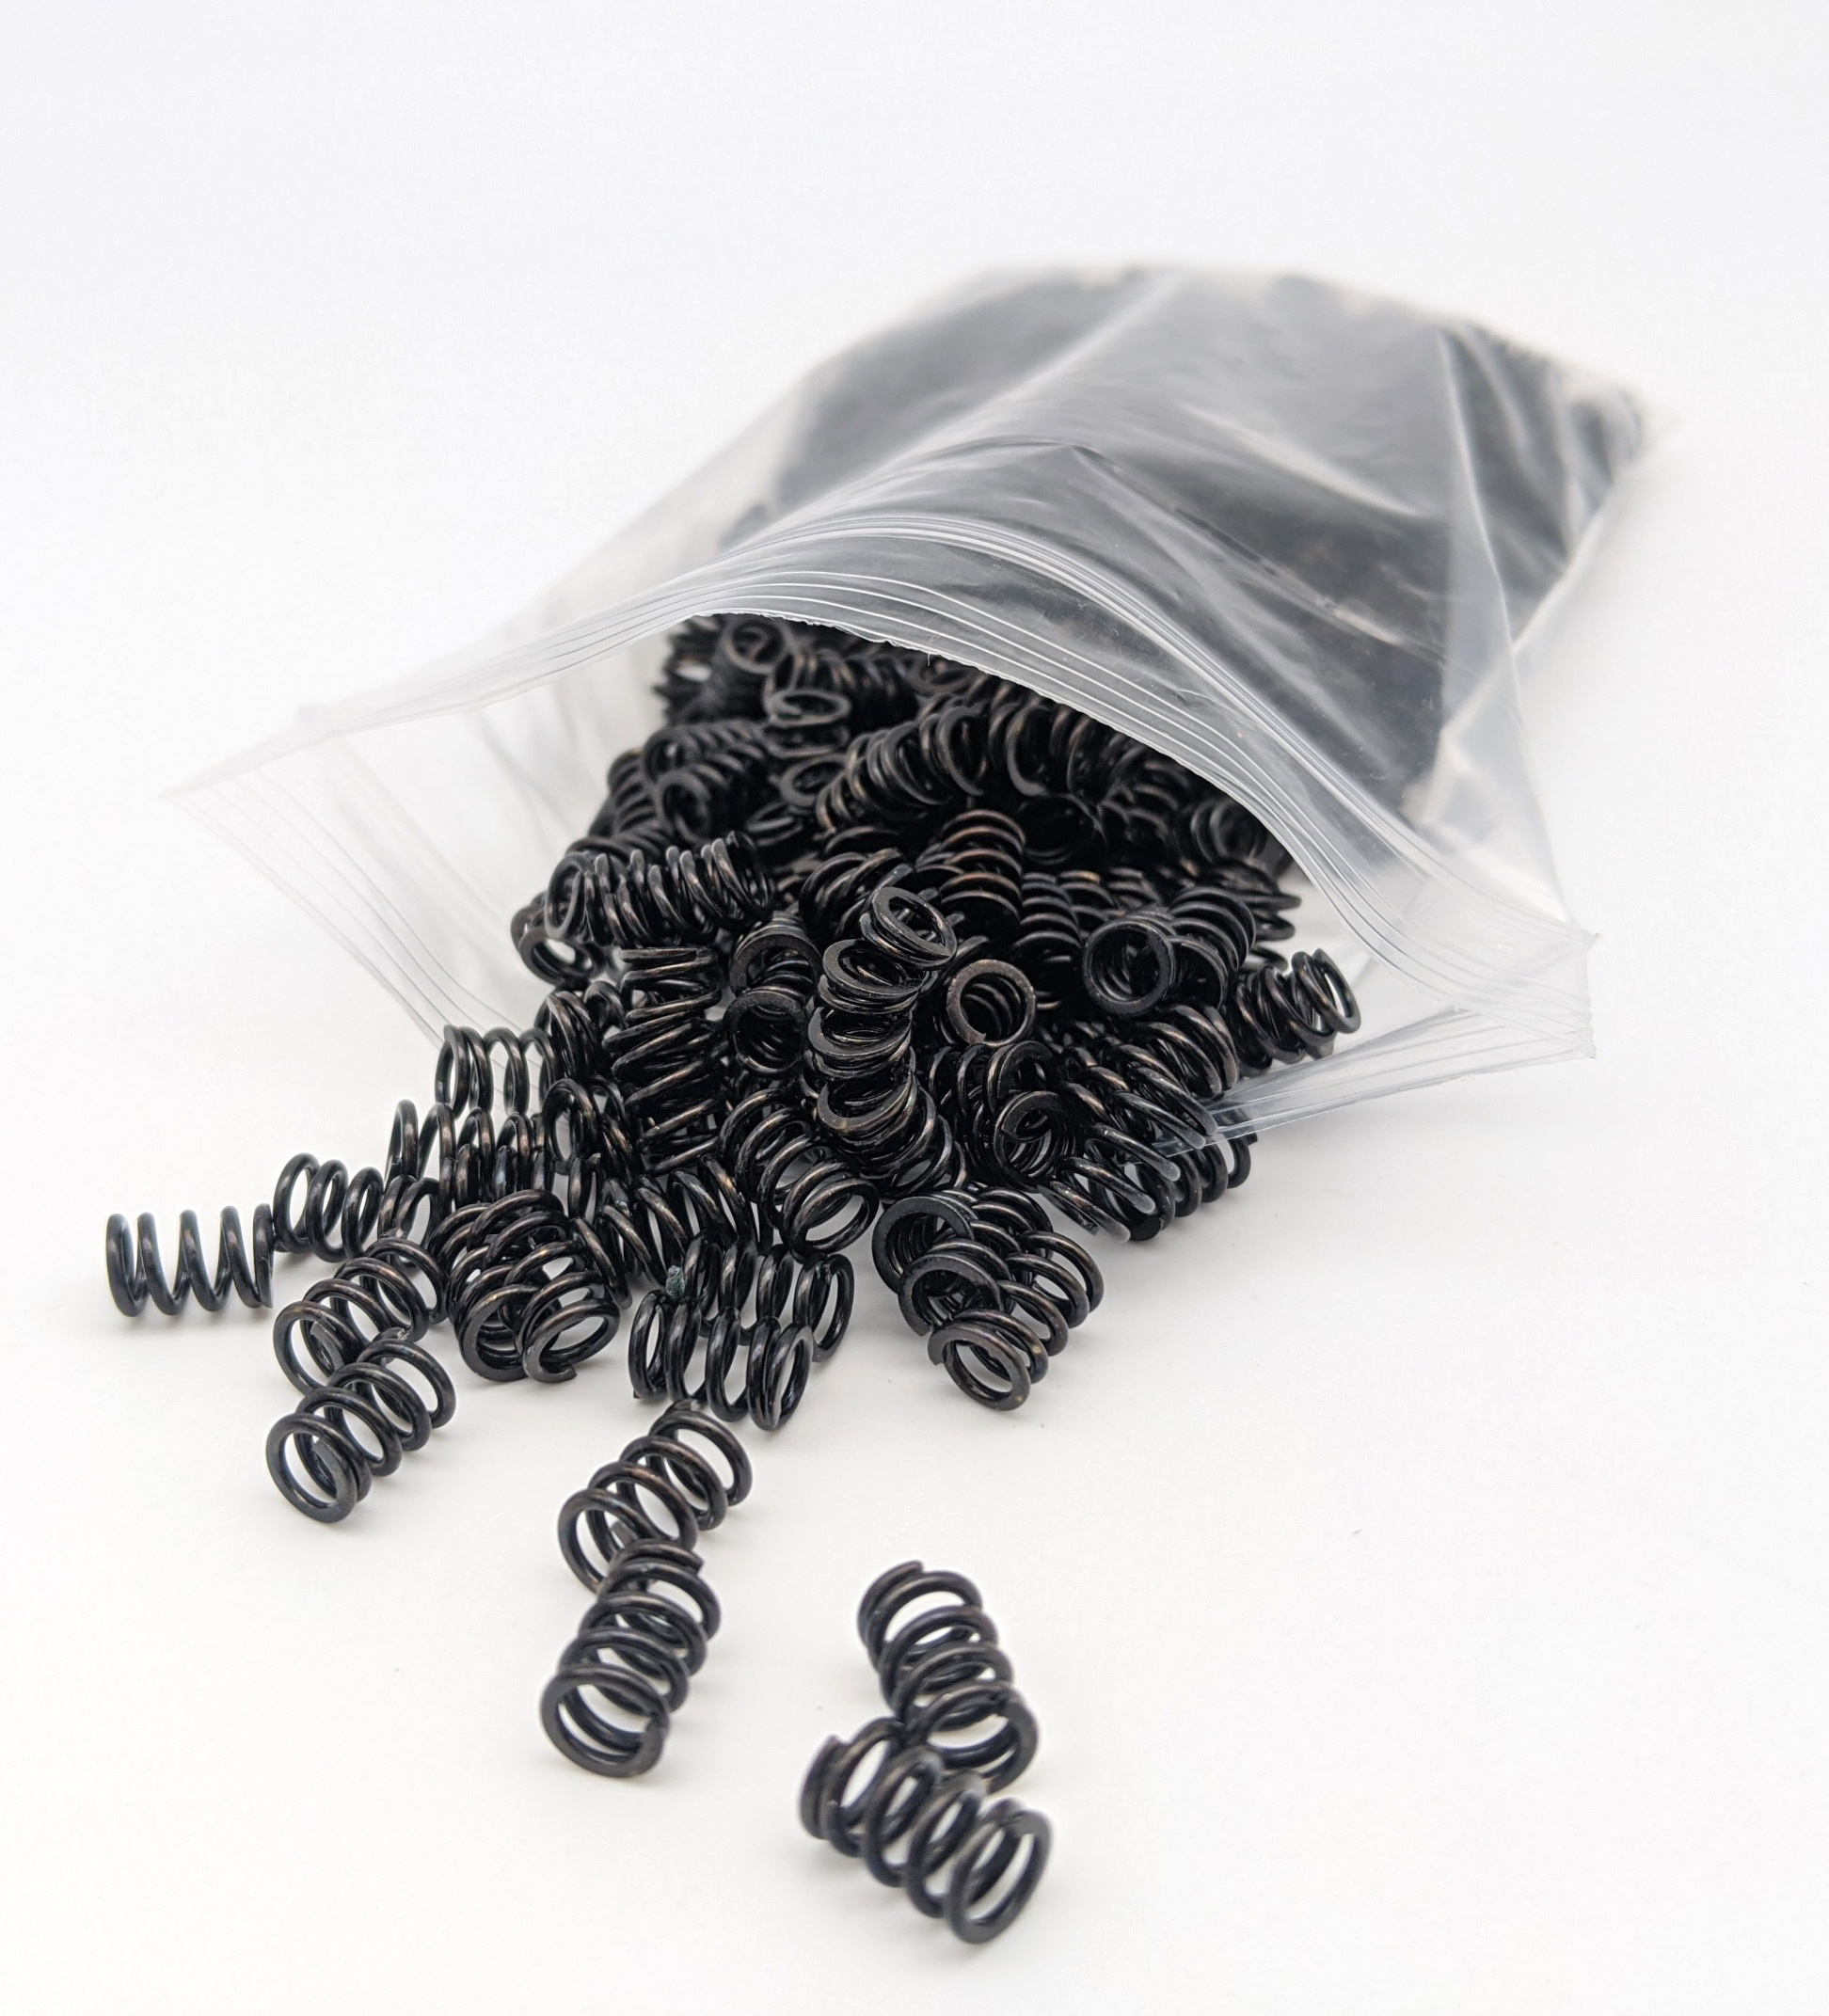 A small bag of custom coil springs with black finish